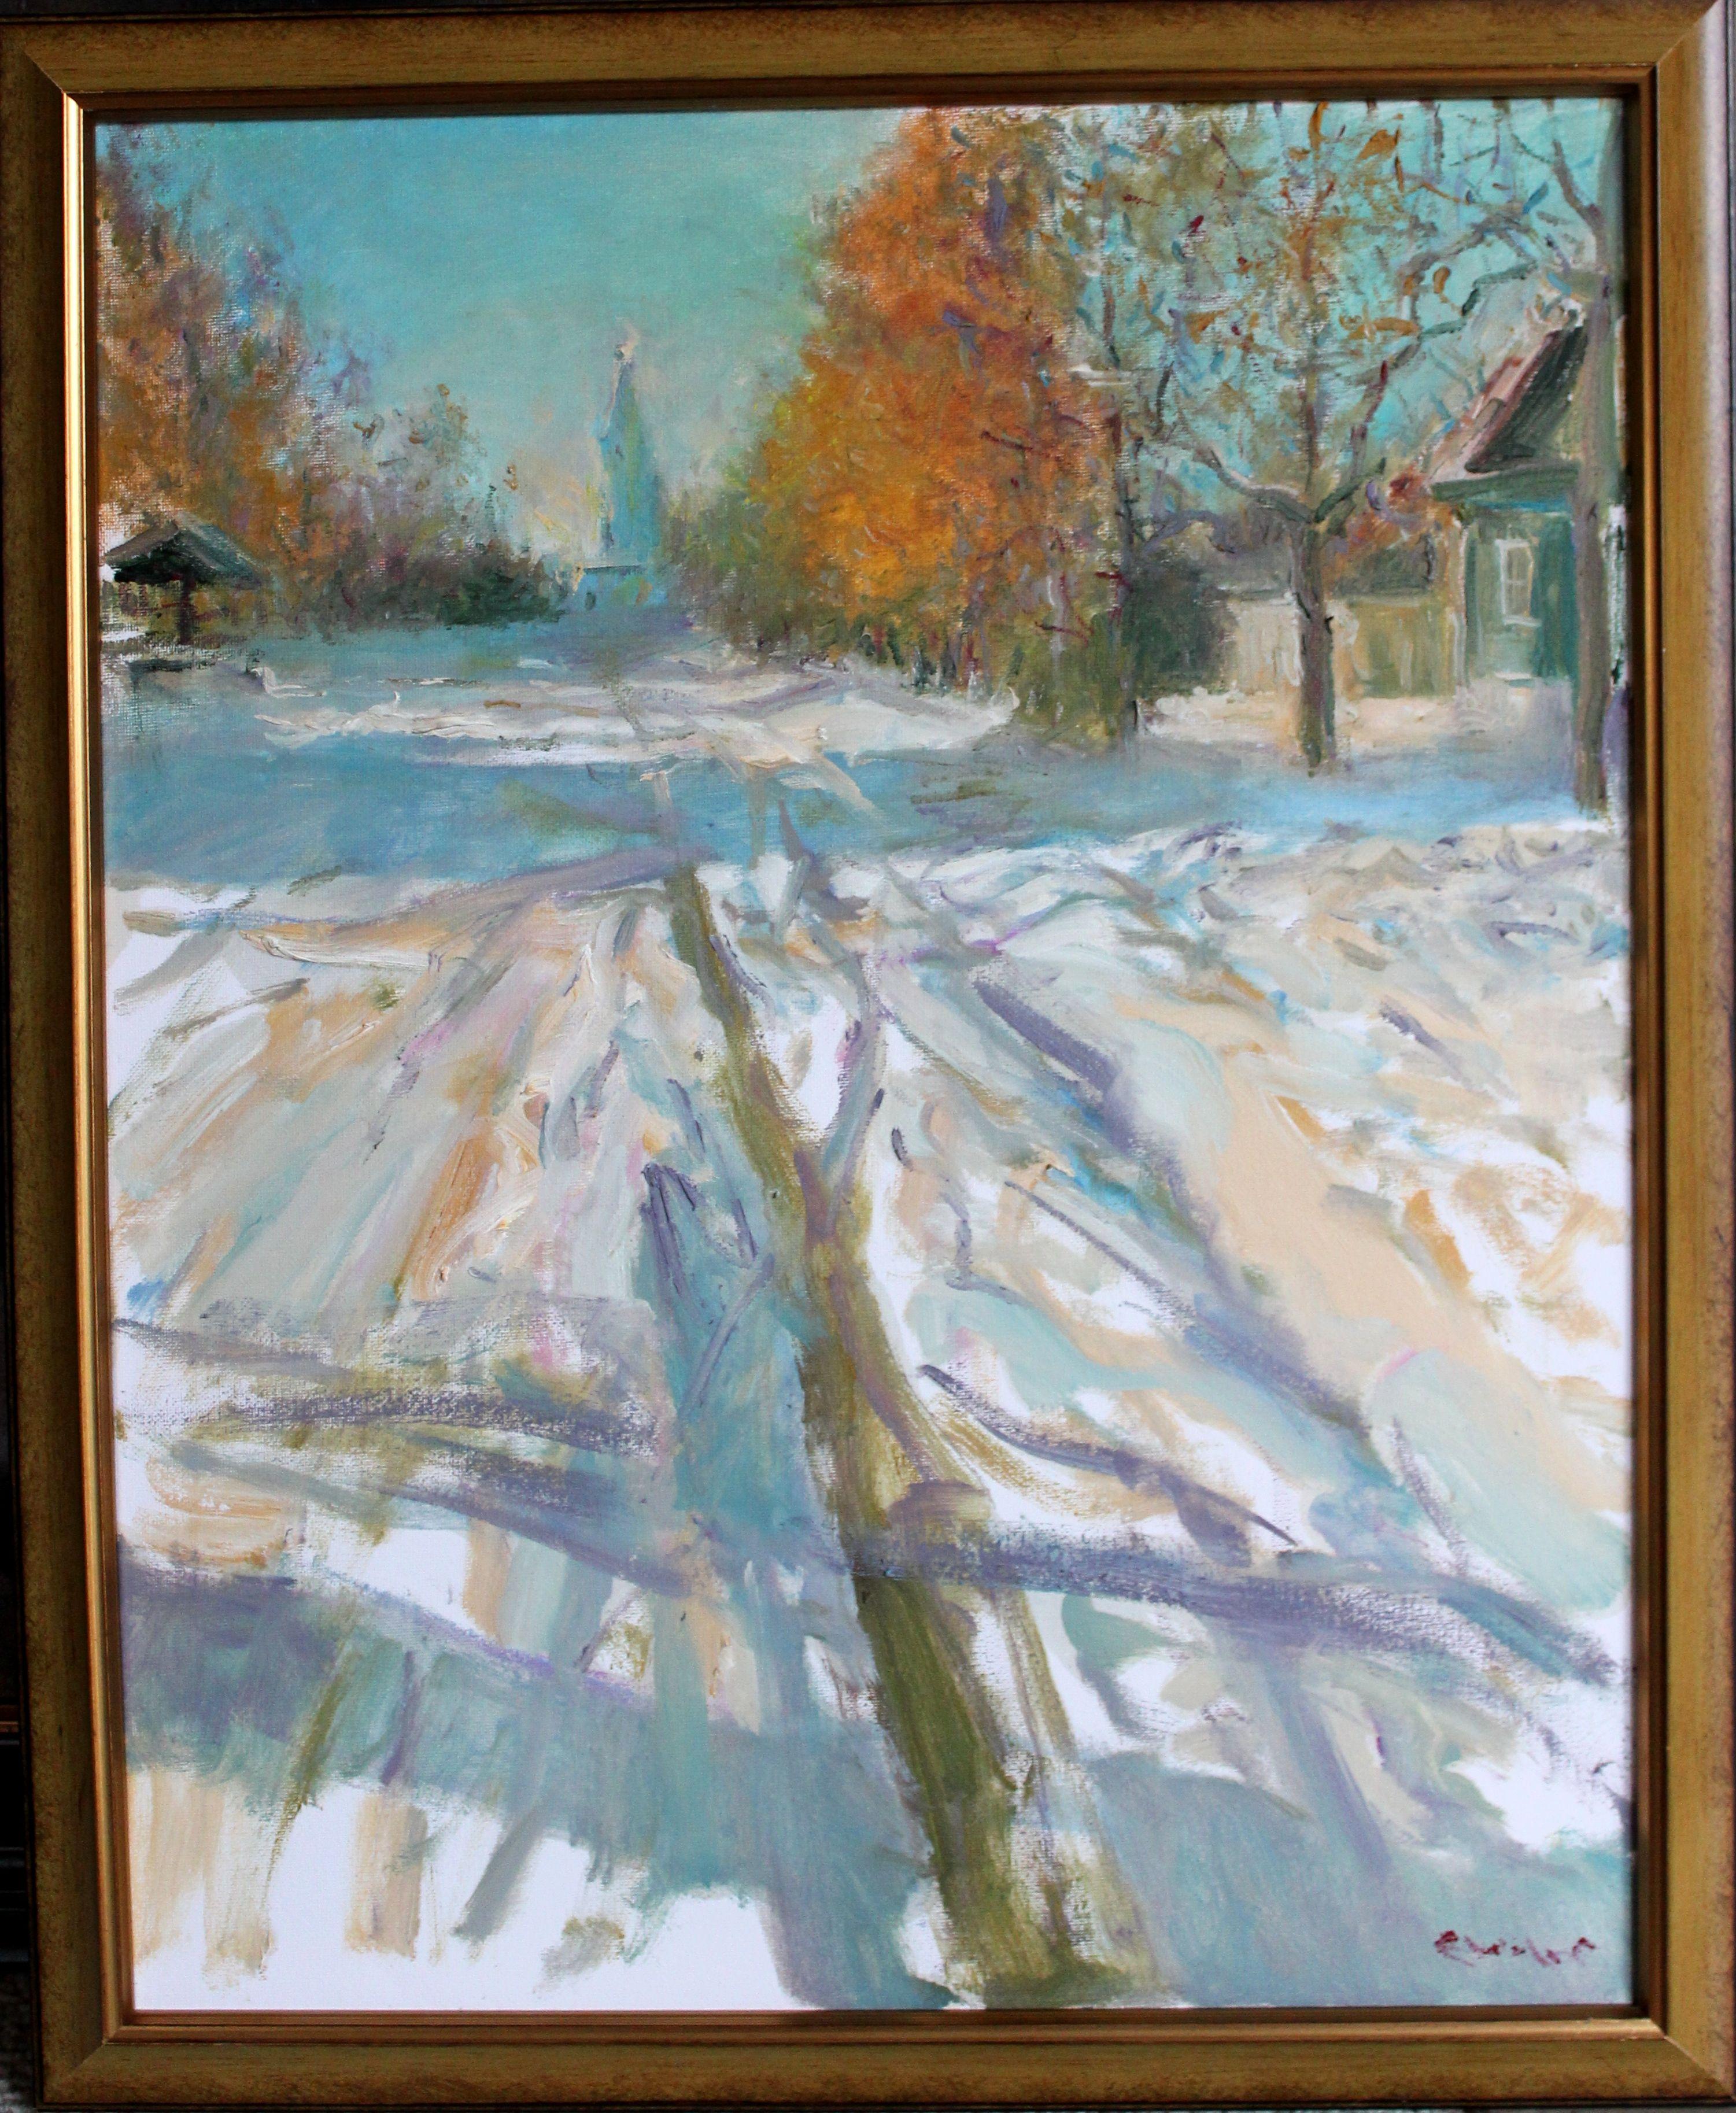 Winter Landscape: :: Painting :: Realism :: This piece comes with an official certificate of authenticity signed by the artist :: Ready to Hang: Yes :: Signed: Yes :: Signature Location: Bottom right :: Canvas :: Portrait :: Original :: Framed: Yes